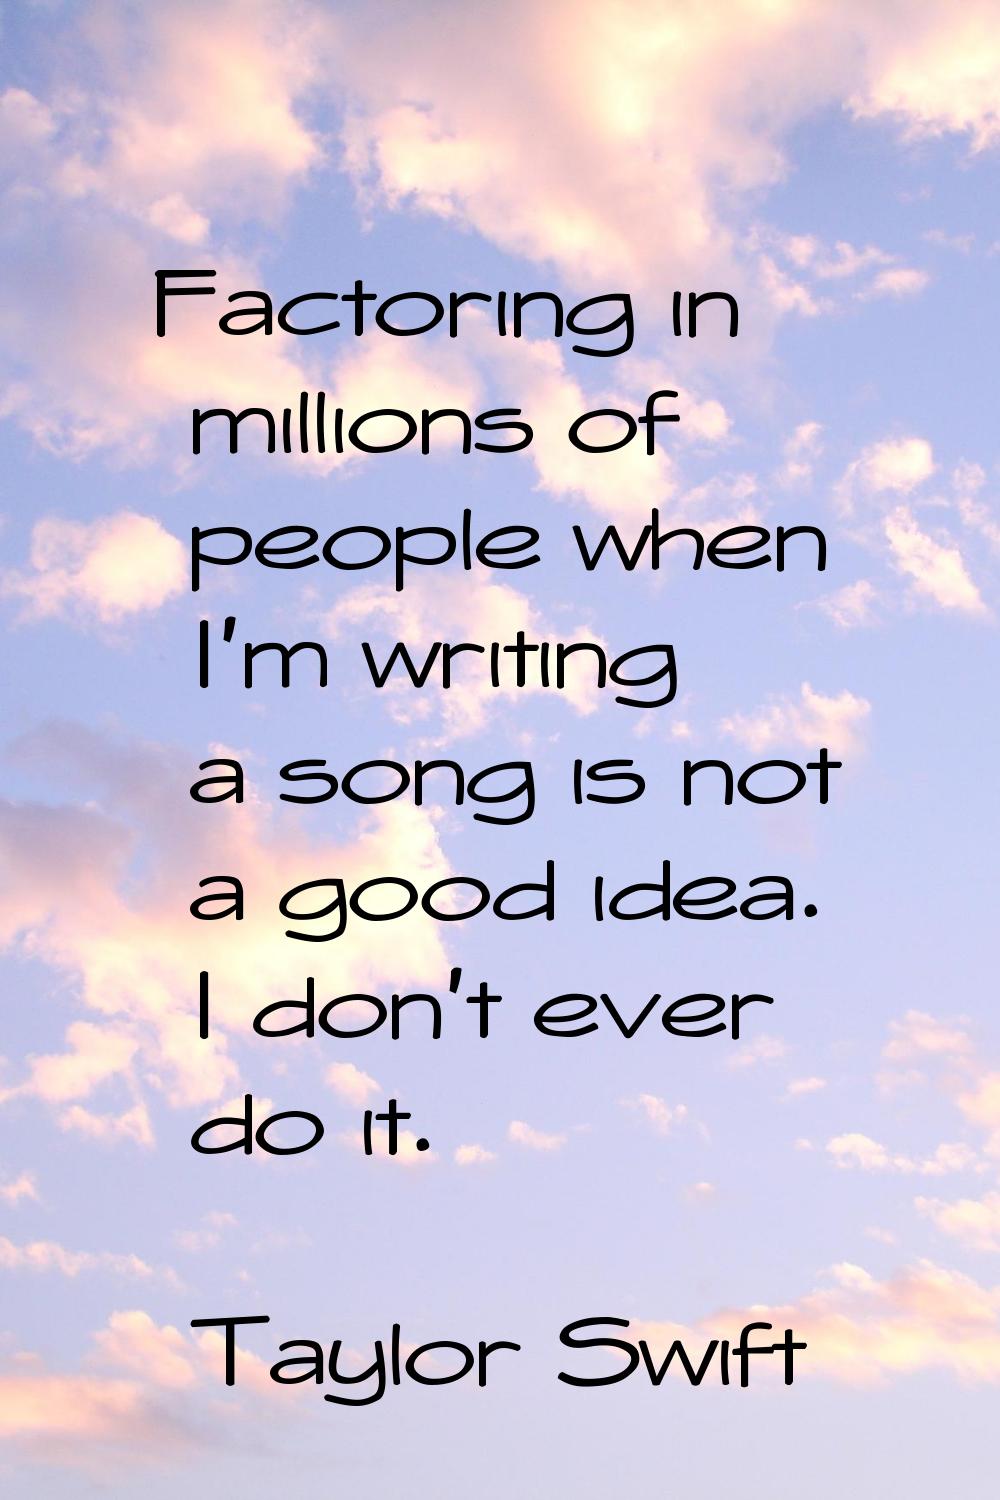 Factoring in millions of people when I'm writing a song is not a good idea. I don't ever do it.